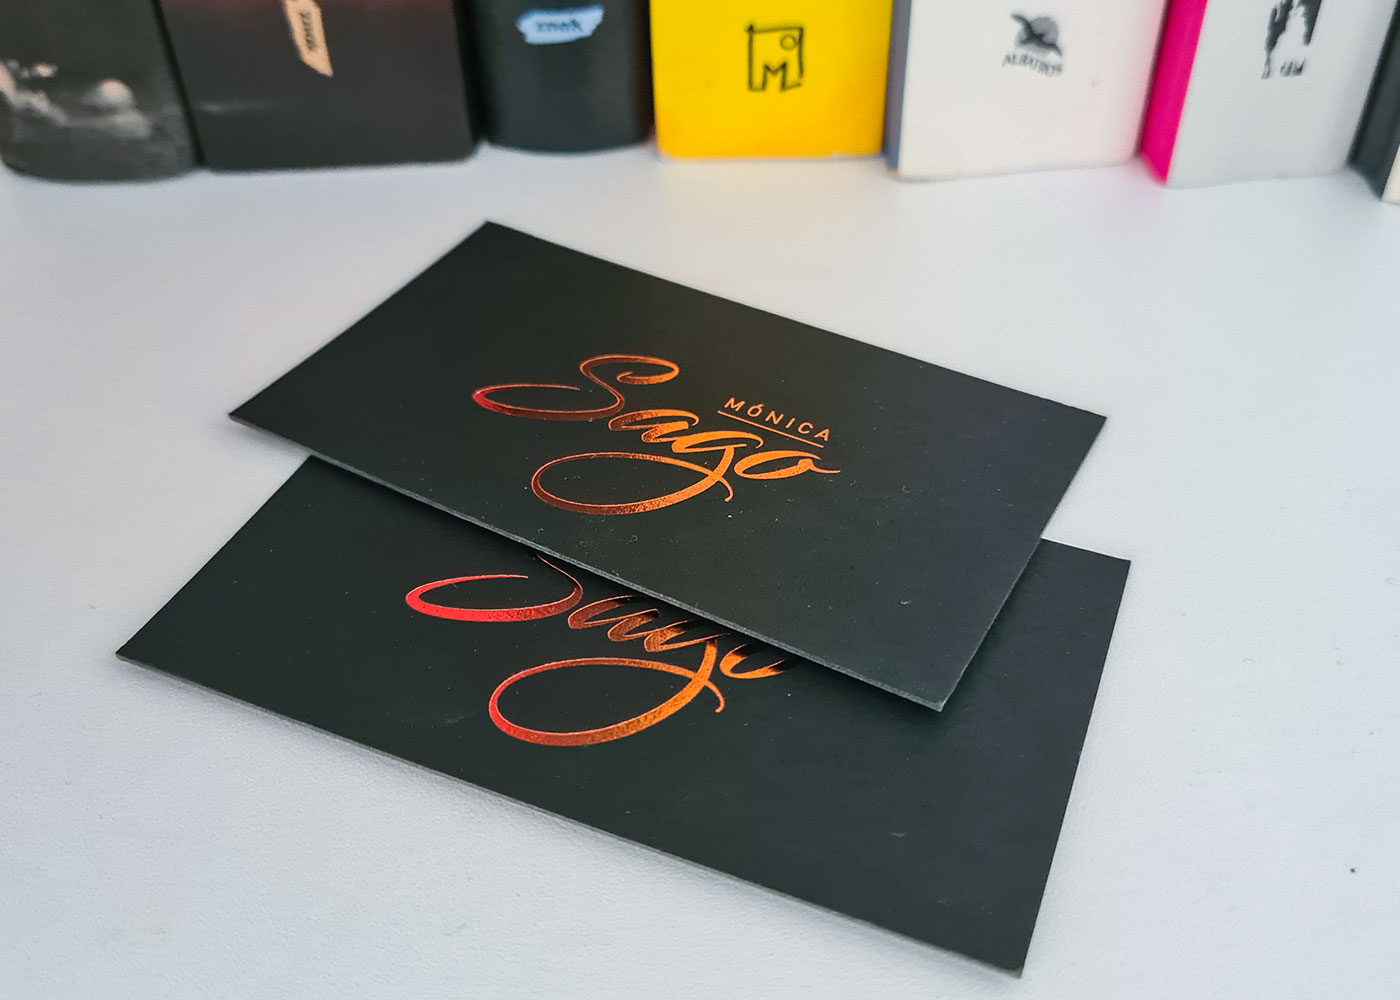 Uncoated Business Cards